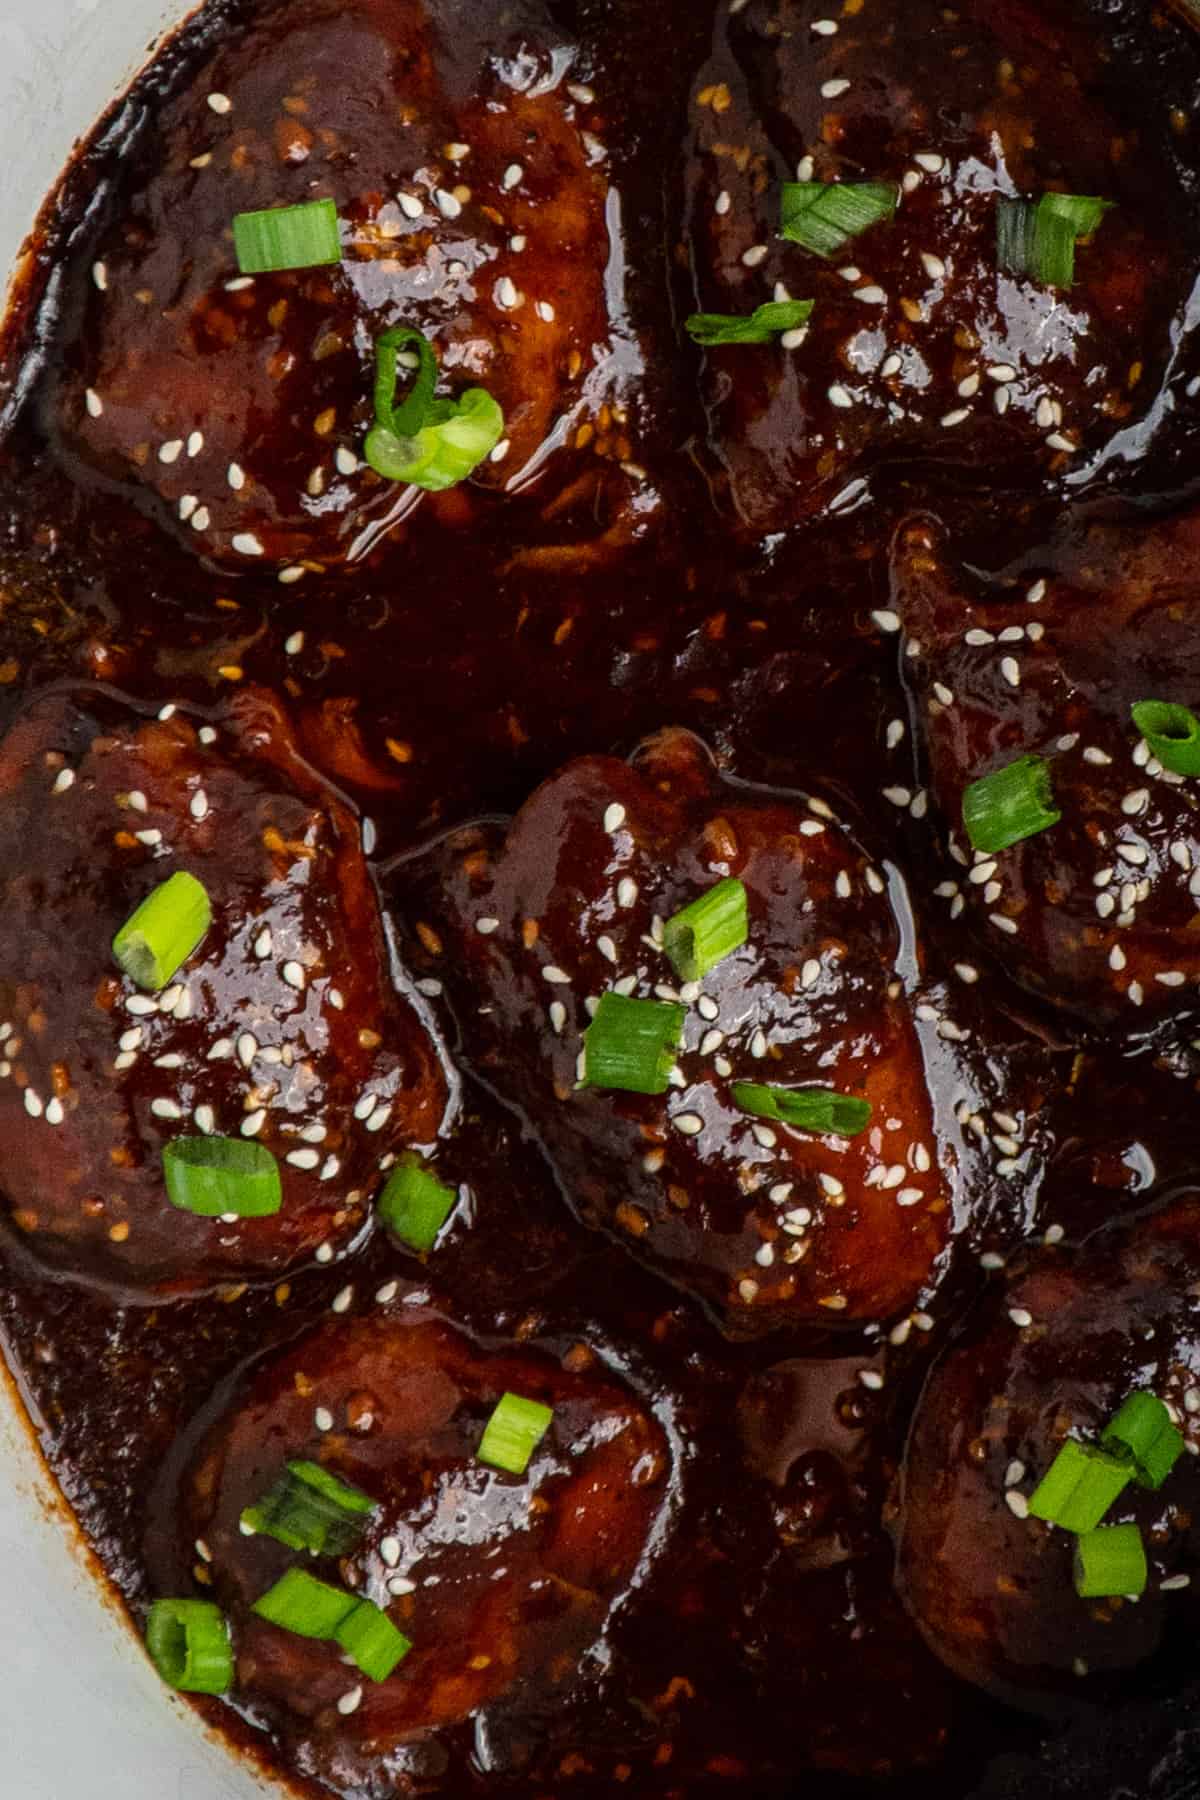 Honey garlic chicken in a crock pot garnished with sesame seeds and green onions.